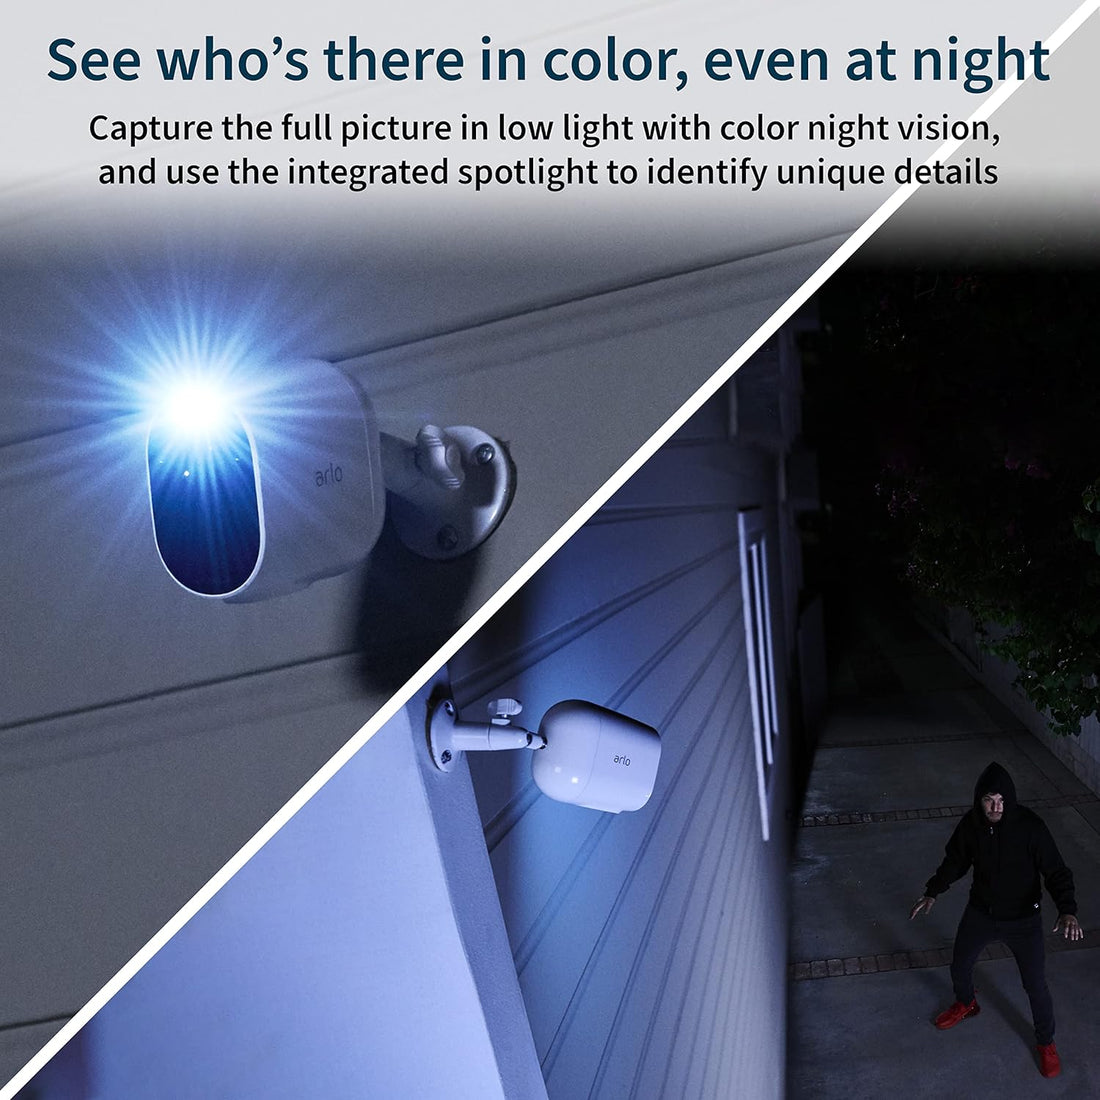 Arlo Essential Spotlight Camera | Wire-Free 1080p Video | Color Night Vision, 2-Way Audio, 6-Month Battery Life, Motion Activated, Direct to WiFi, No Hub Needed | Compatible with Alexa | Black